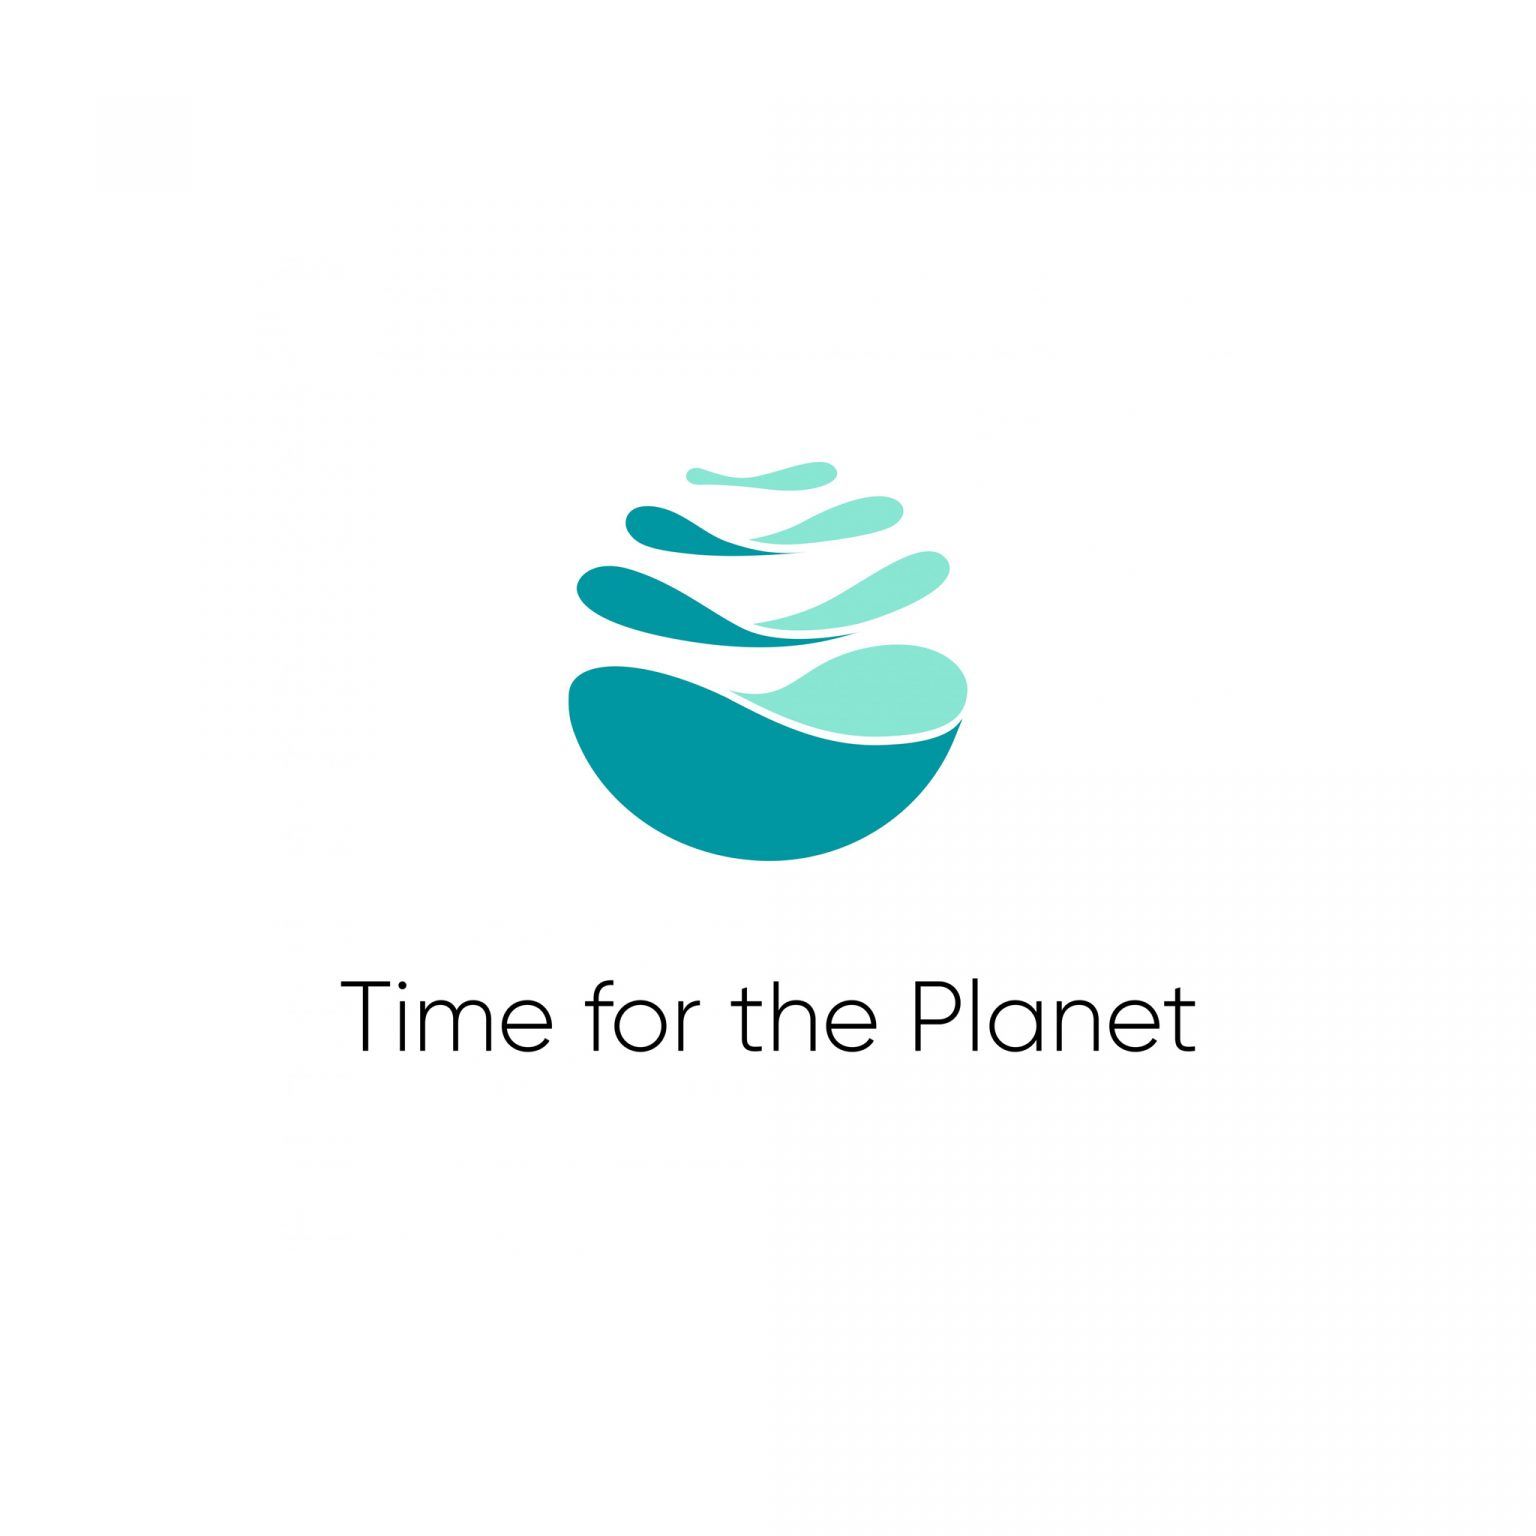 Time for the planet